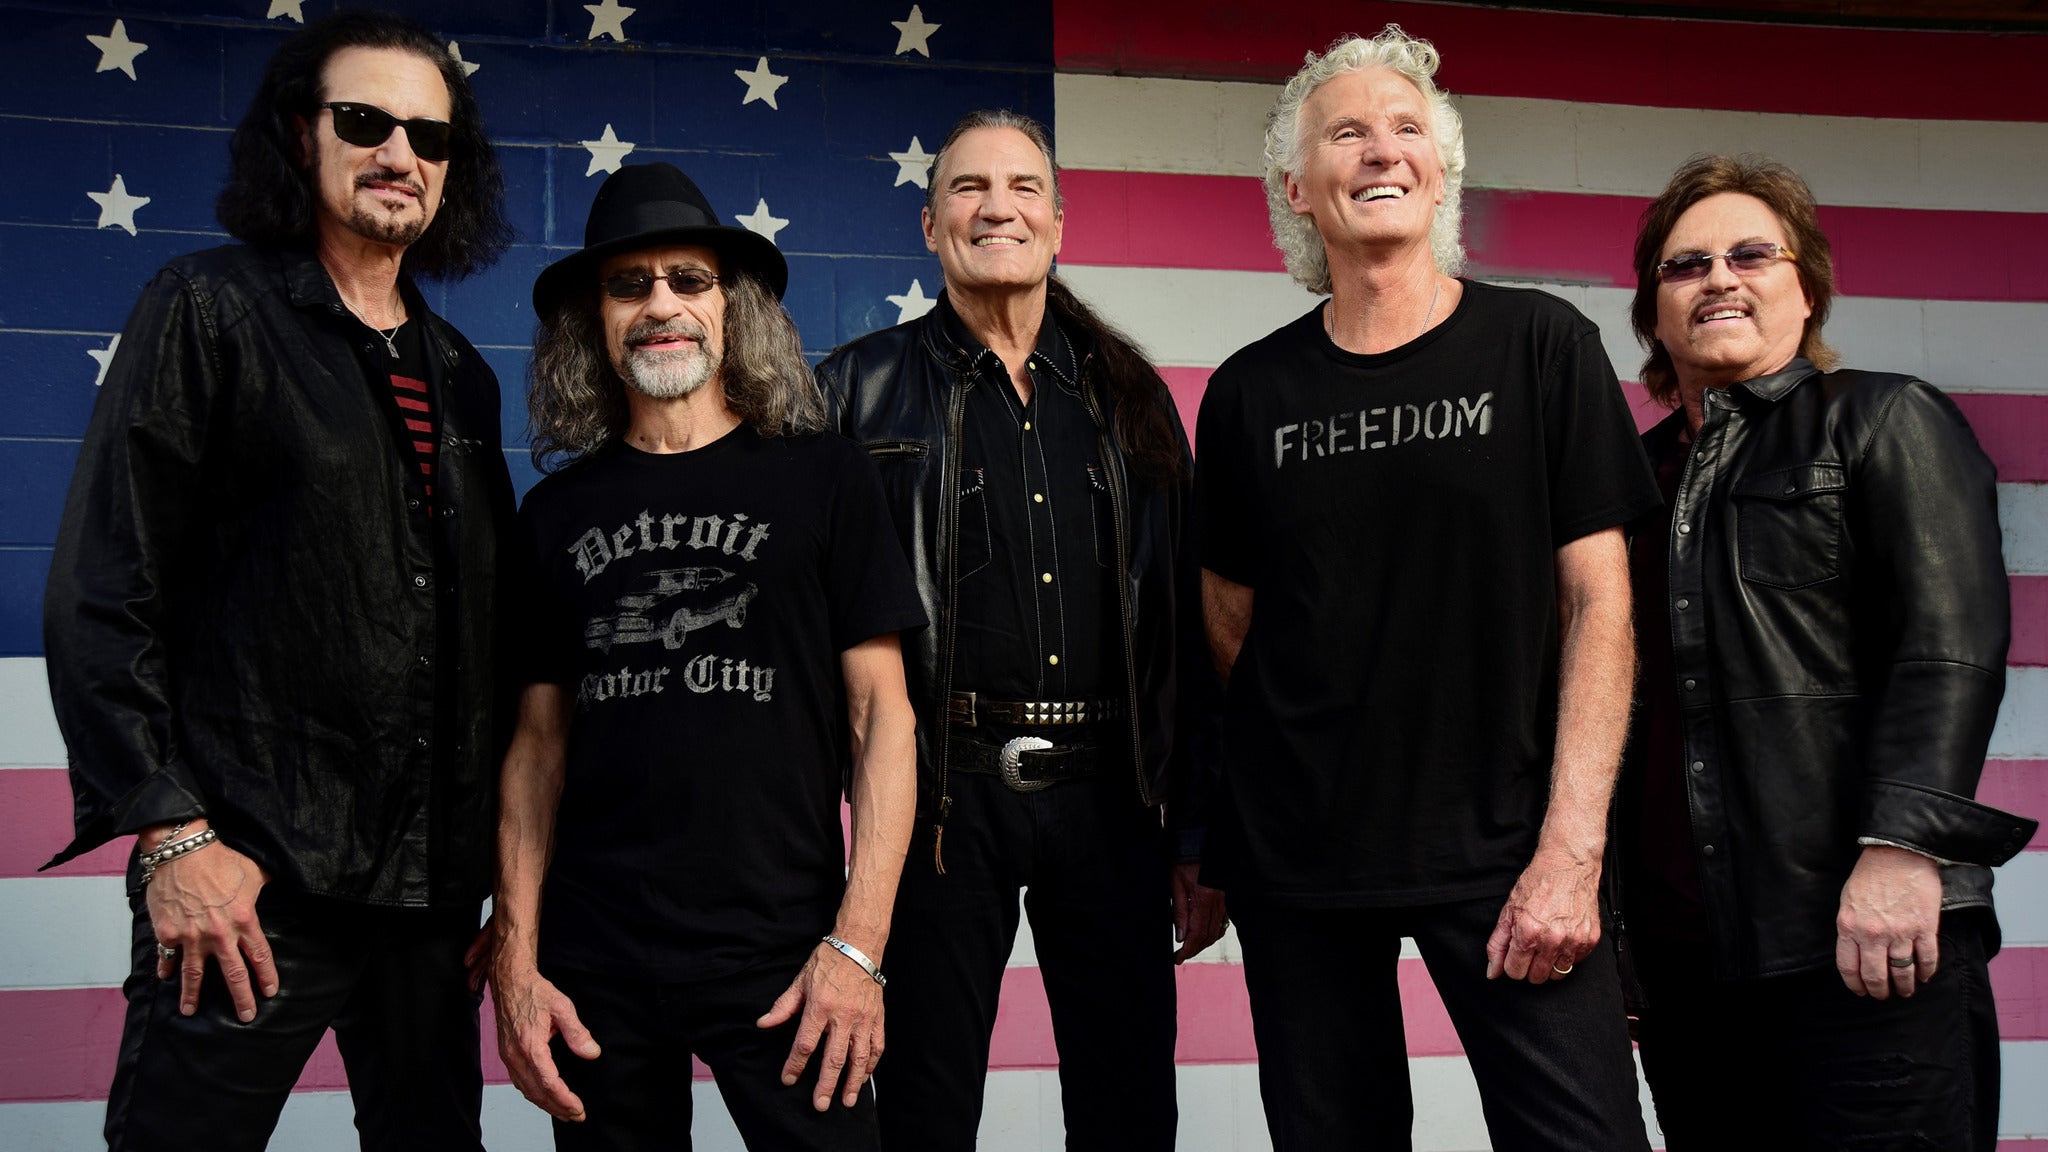 Grand Funk Railroad with Special Guest Foghat